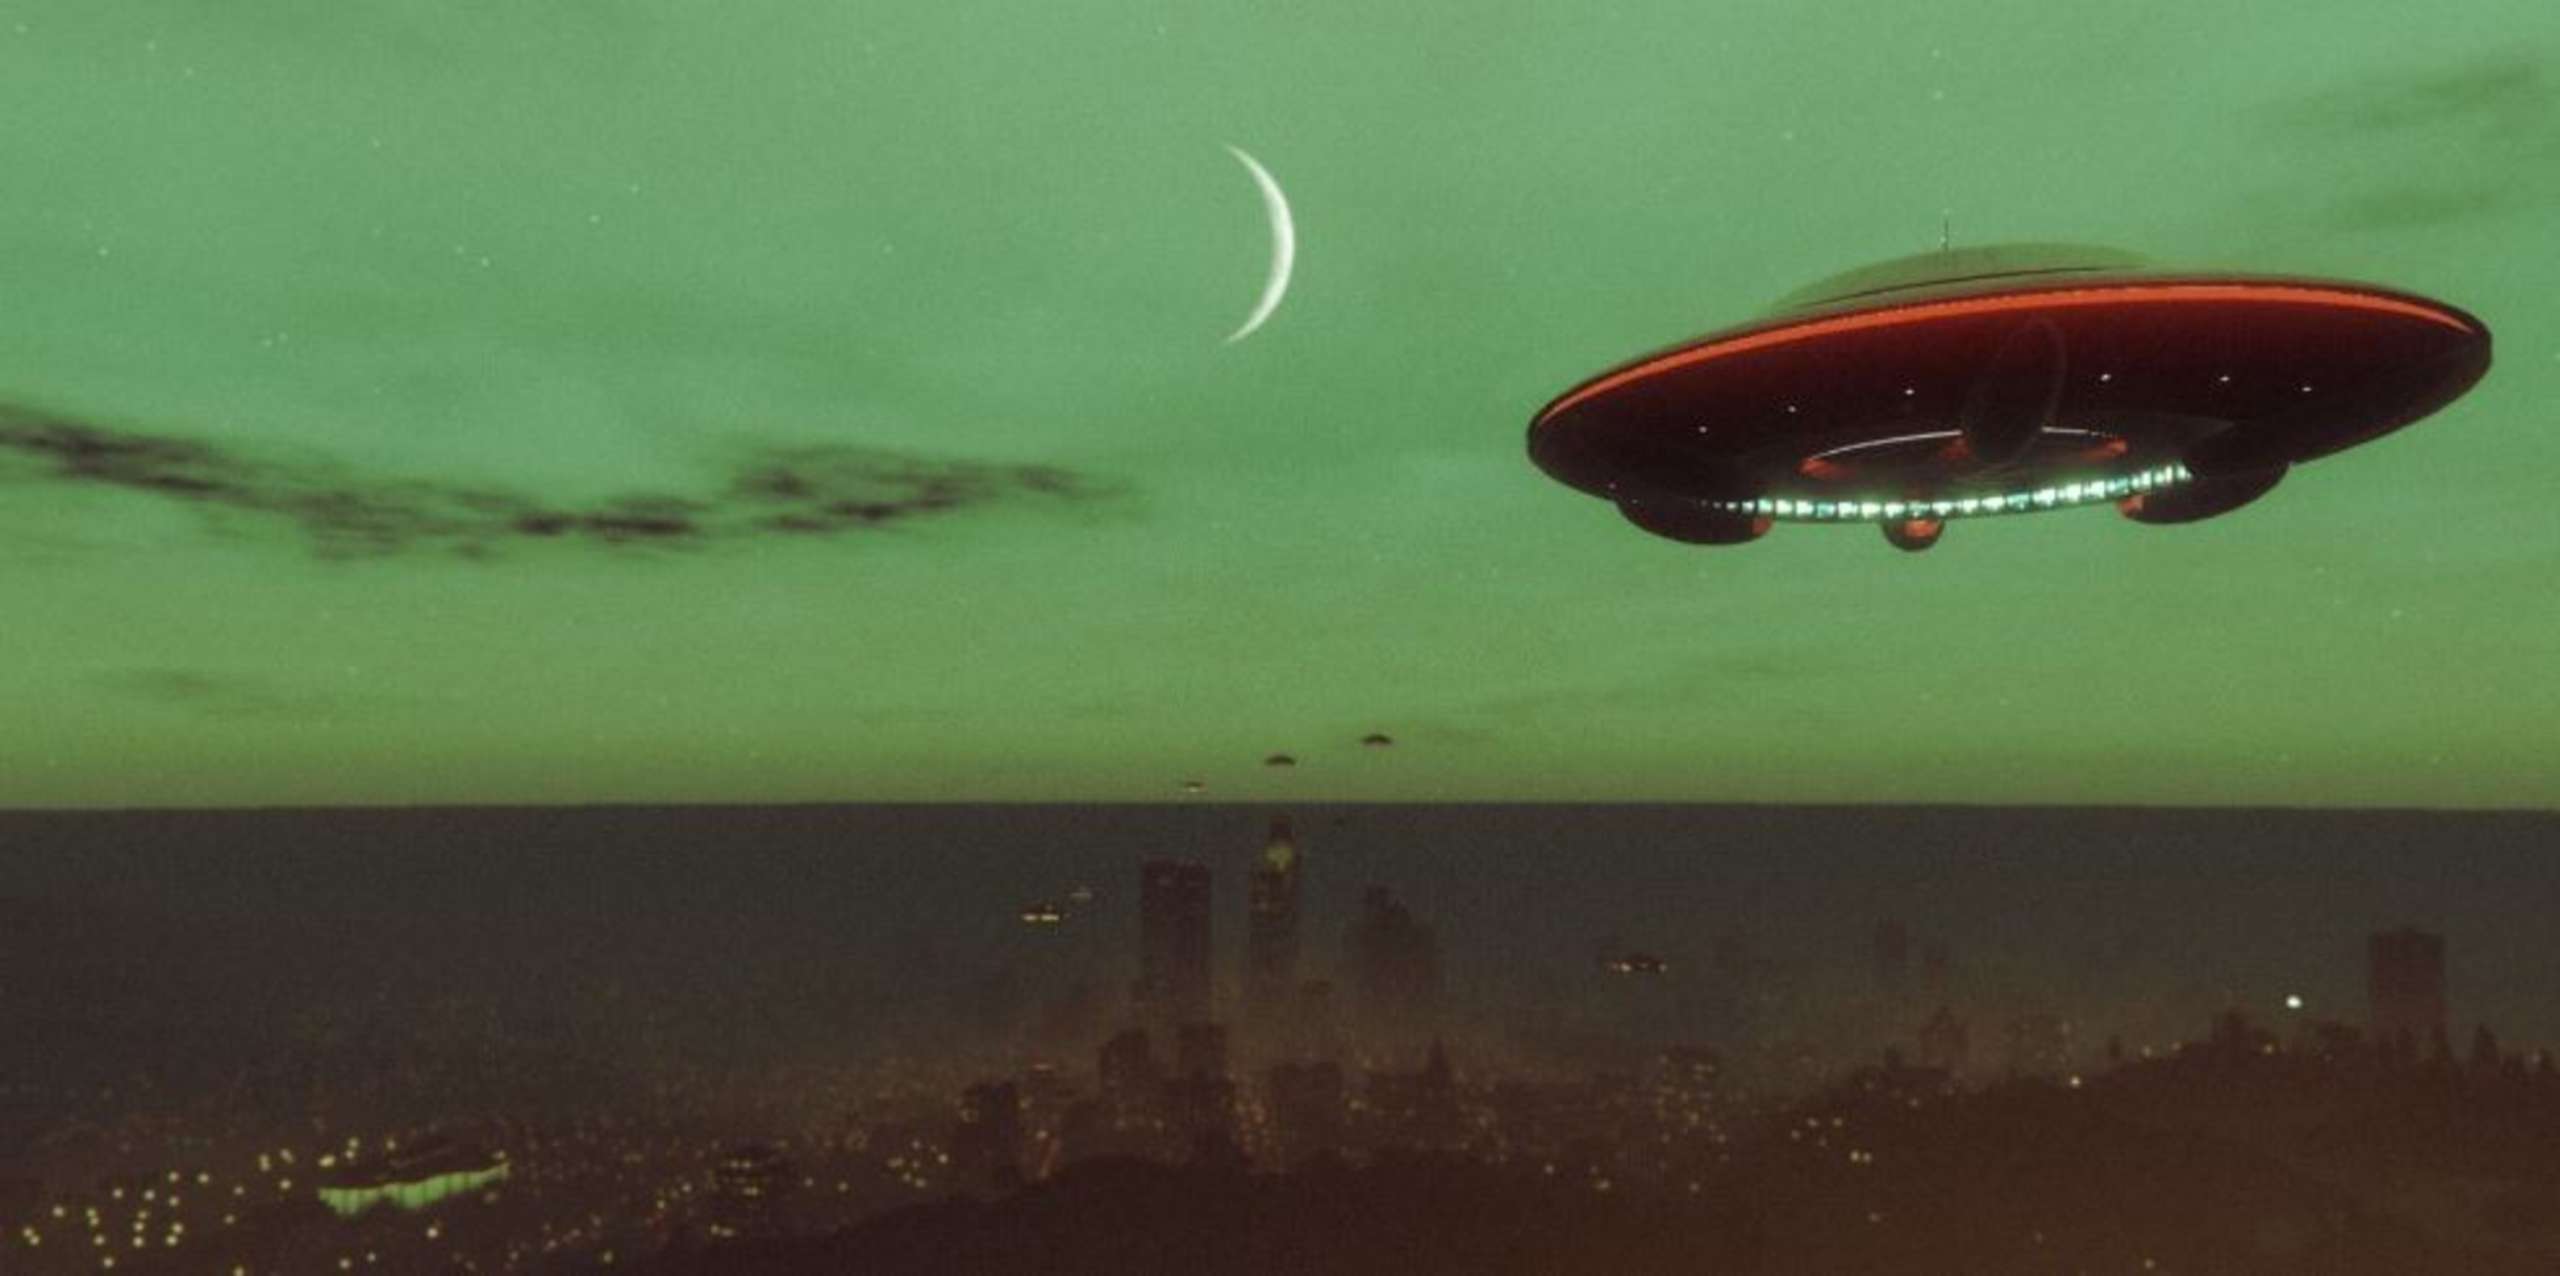 Players Of Grand Theft Auto Online Who Are In Search Of A Spooky Fix Will Be Pleased To Hear That Rockstar Games Has Announced The Strange Presence Of UFOs